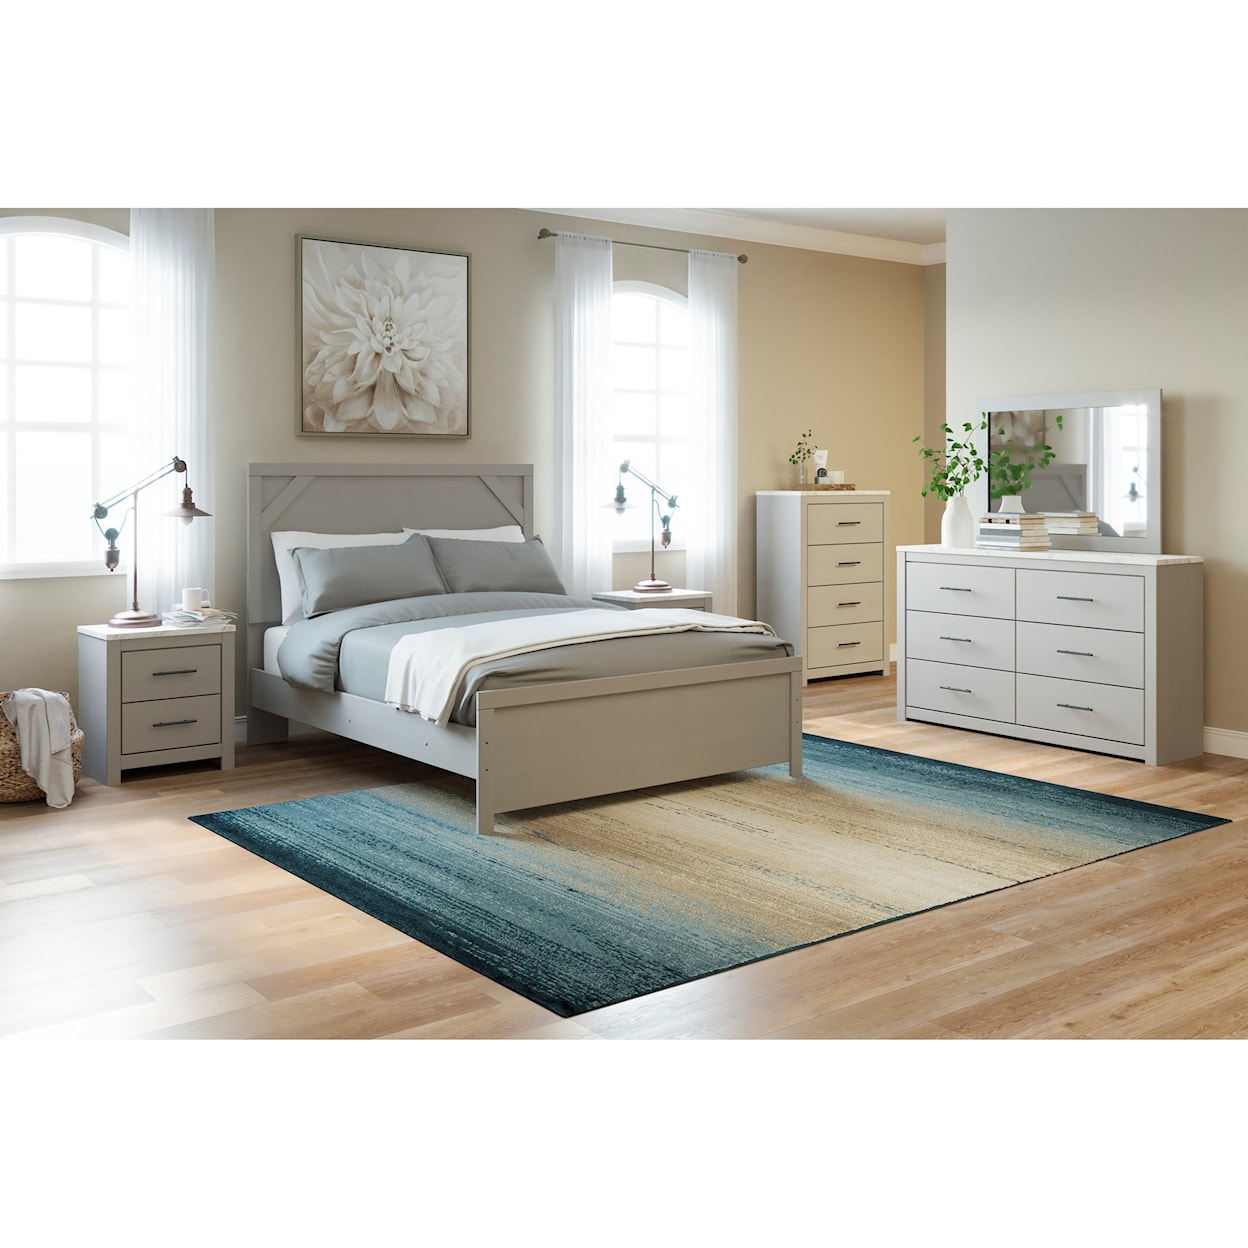 Signature Design by Ashley Cottonburg Queen Bedroom Group